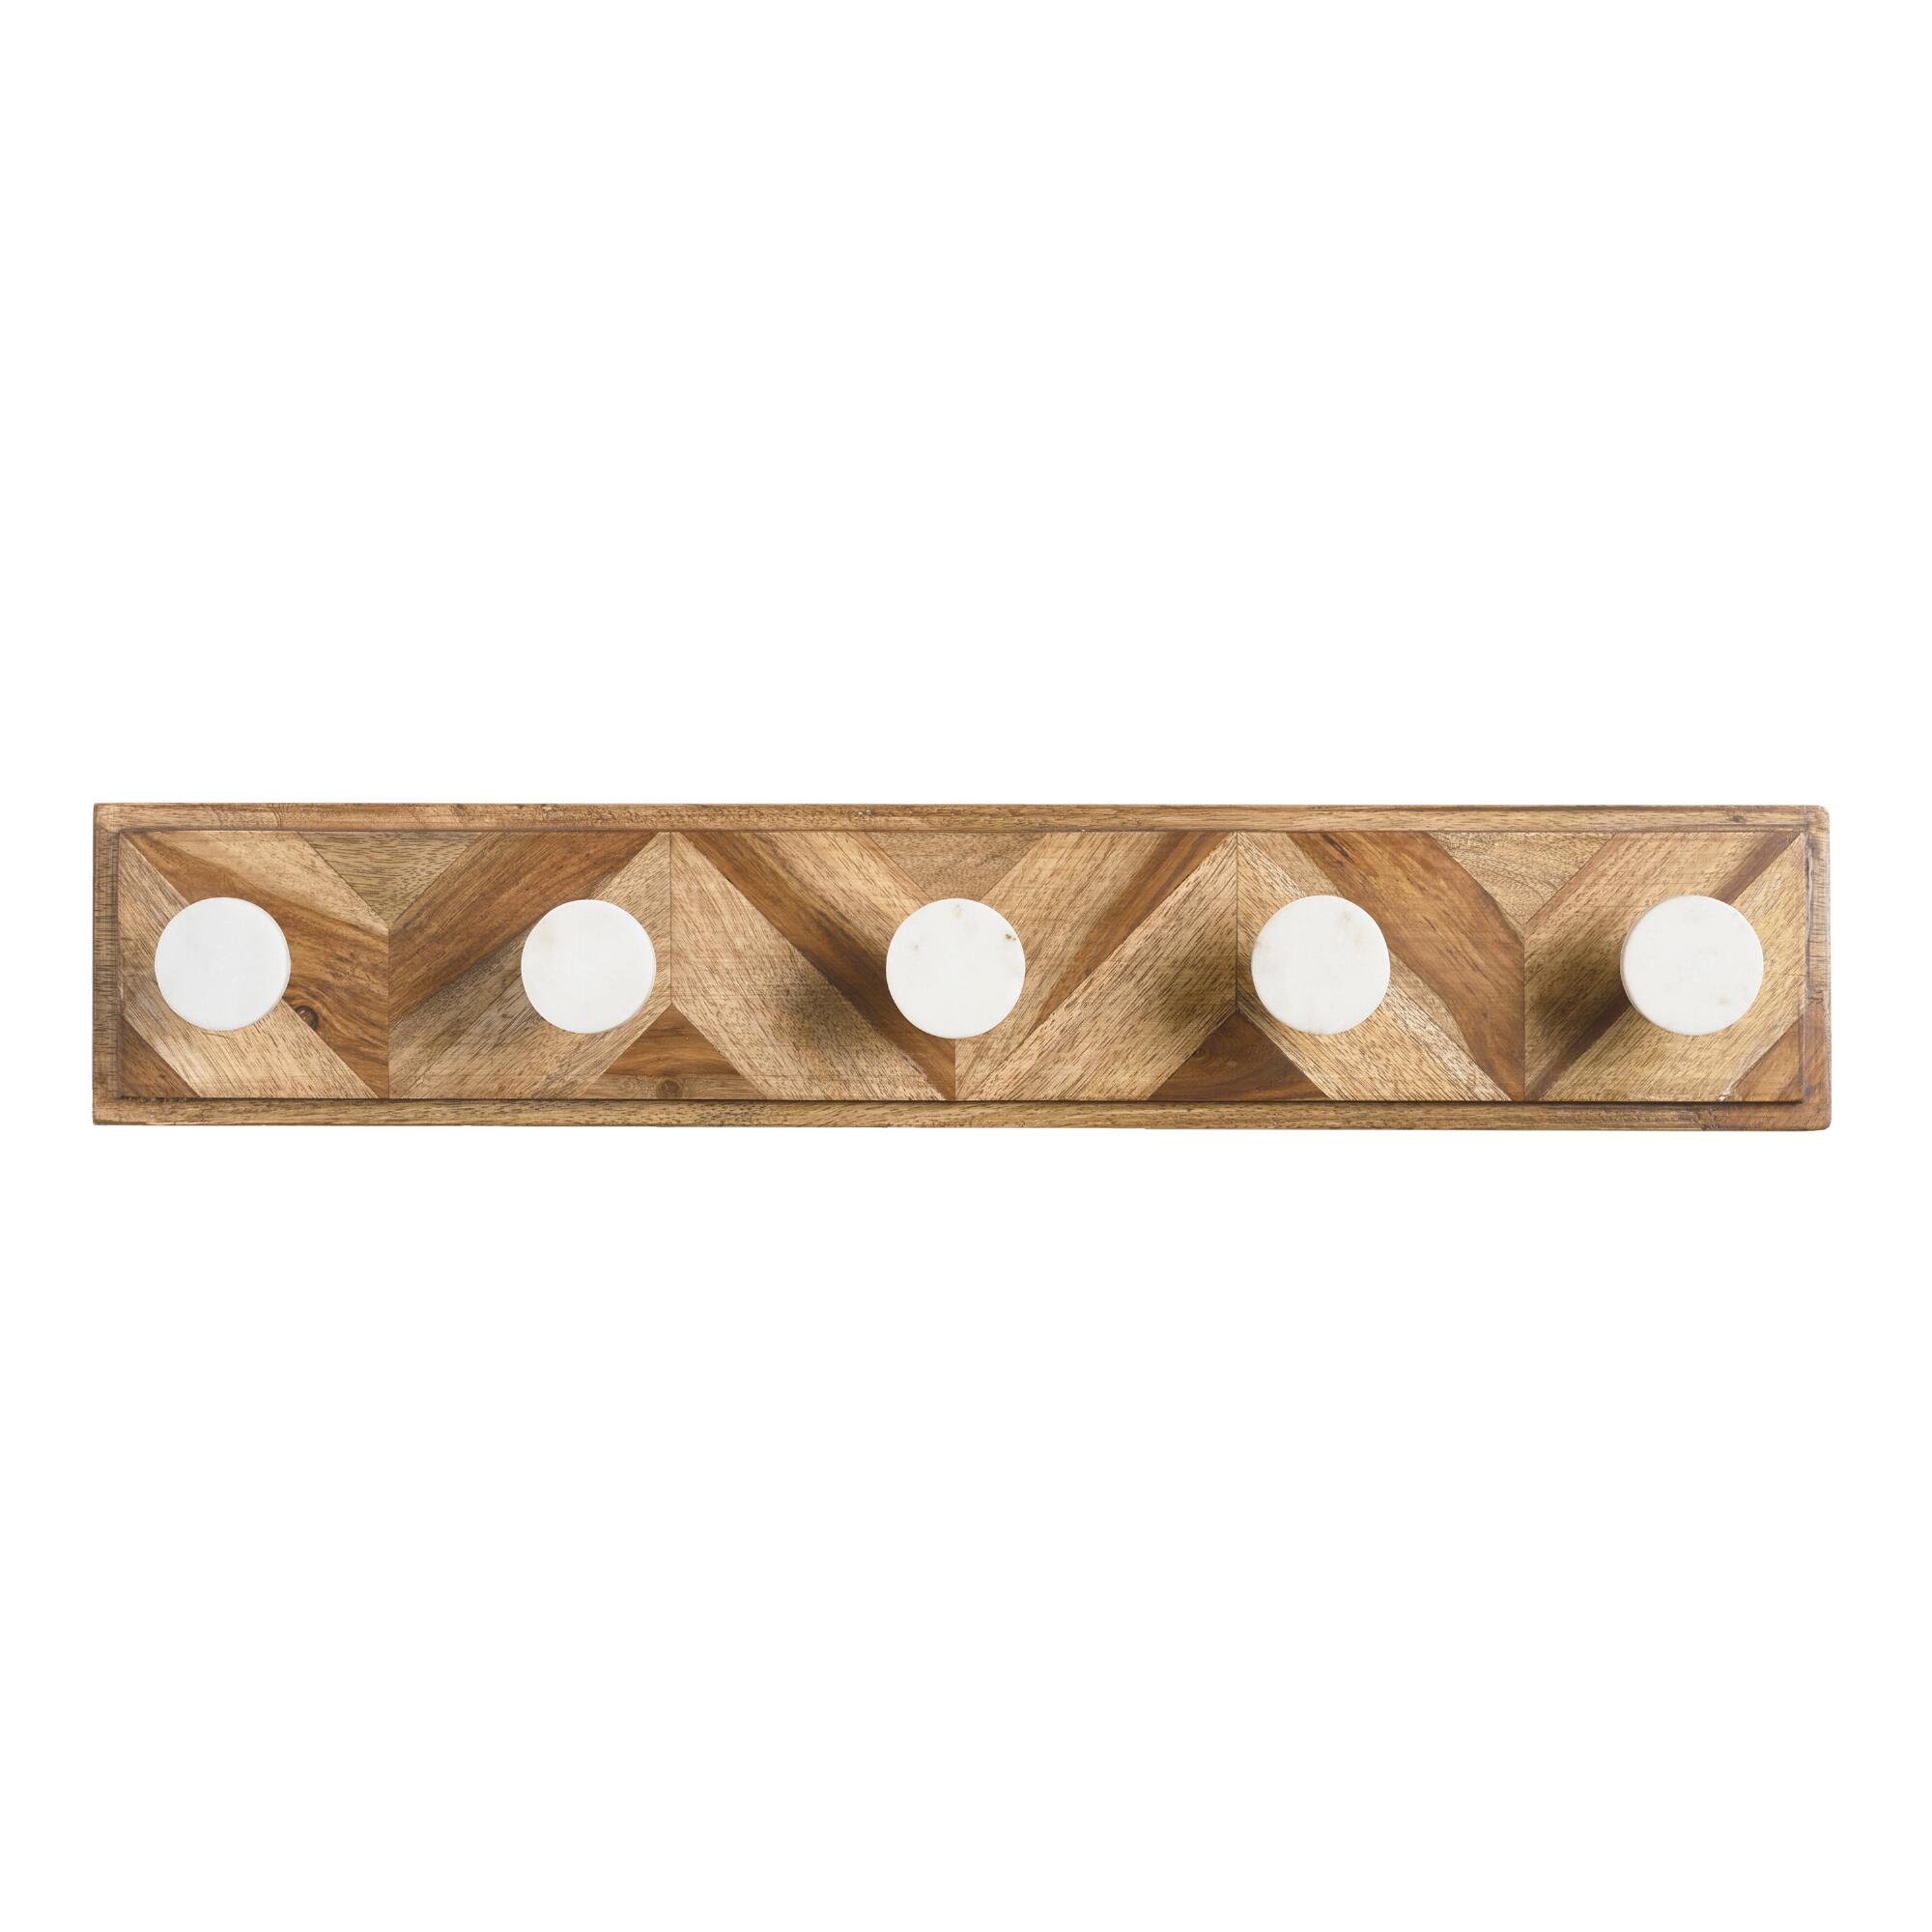 Chevron Wood And Marble Wall Rack: Brown by World Market